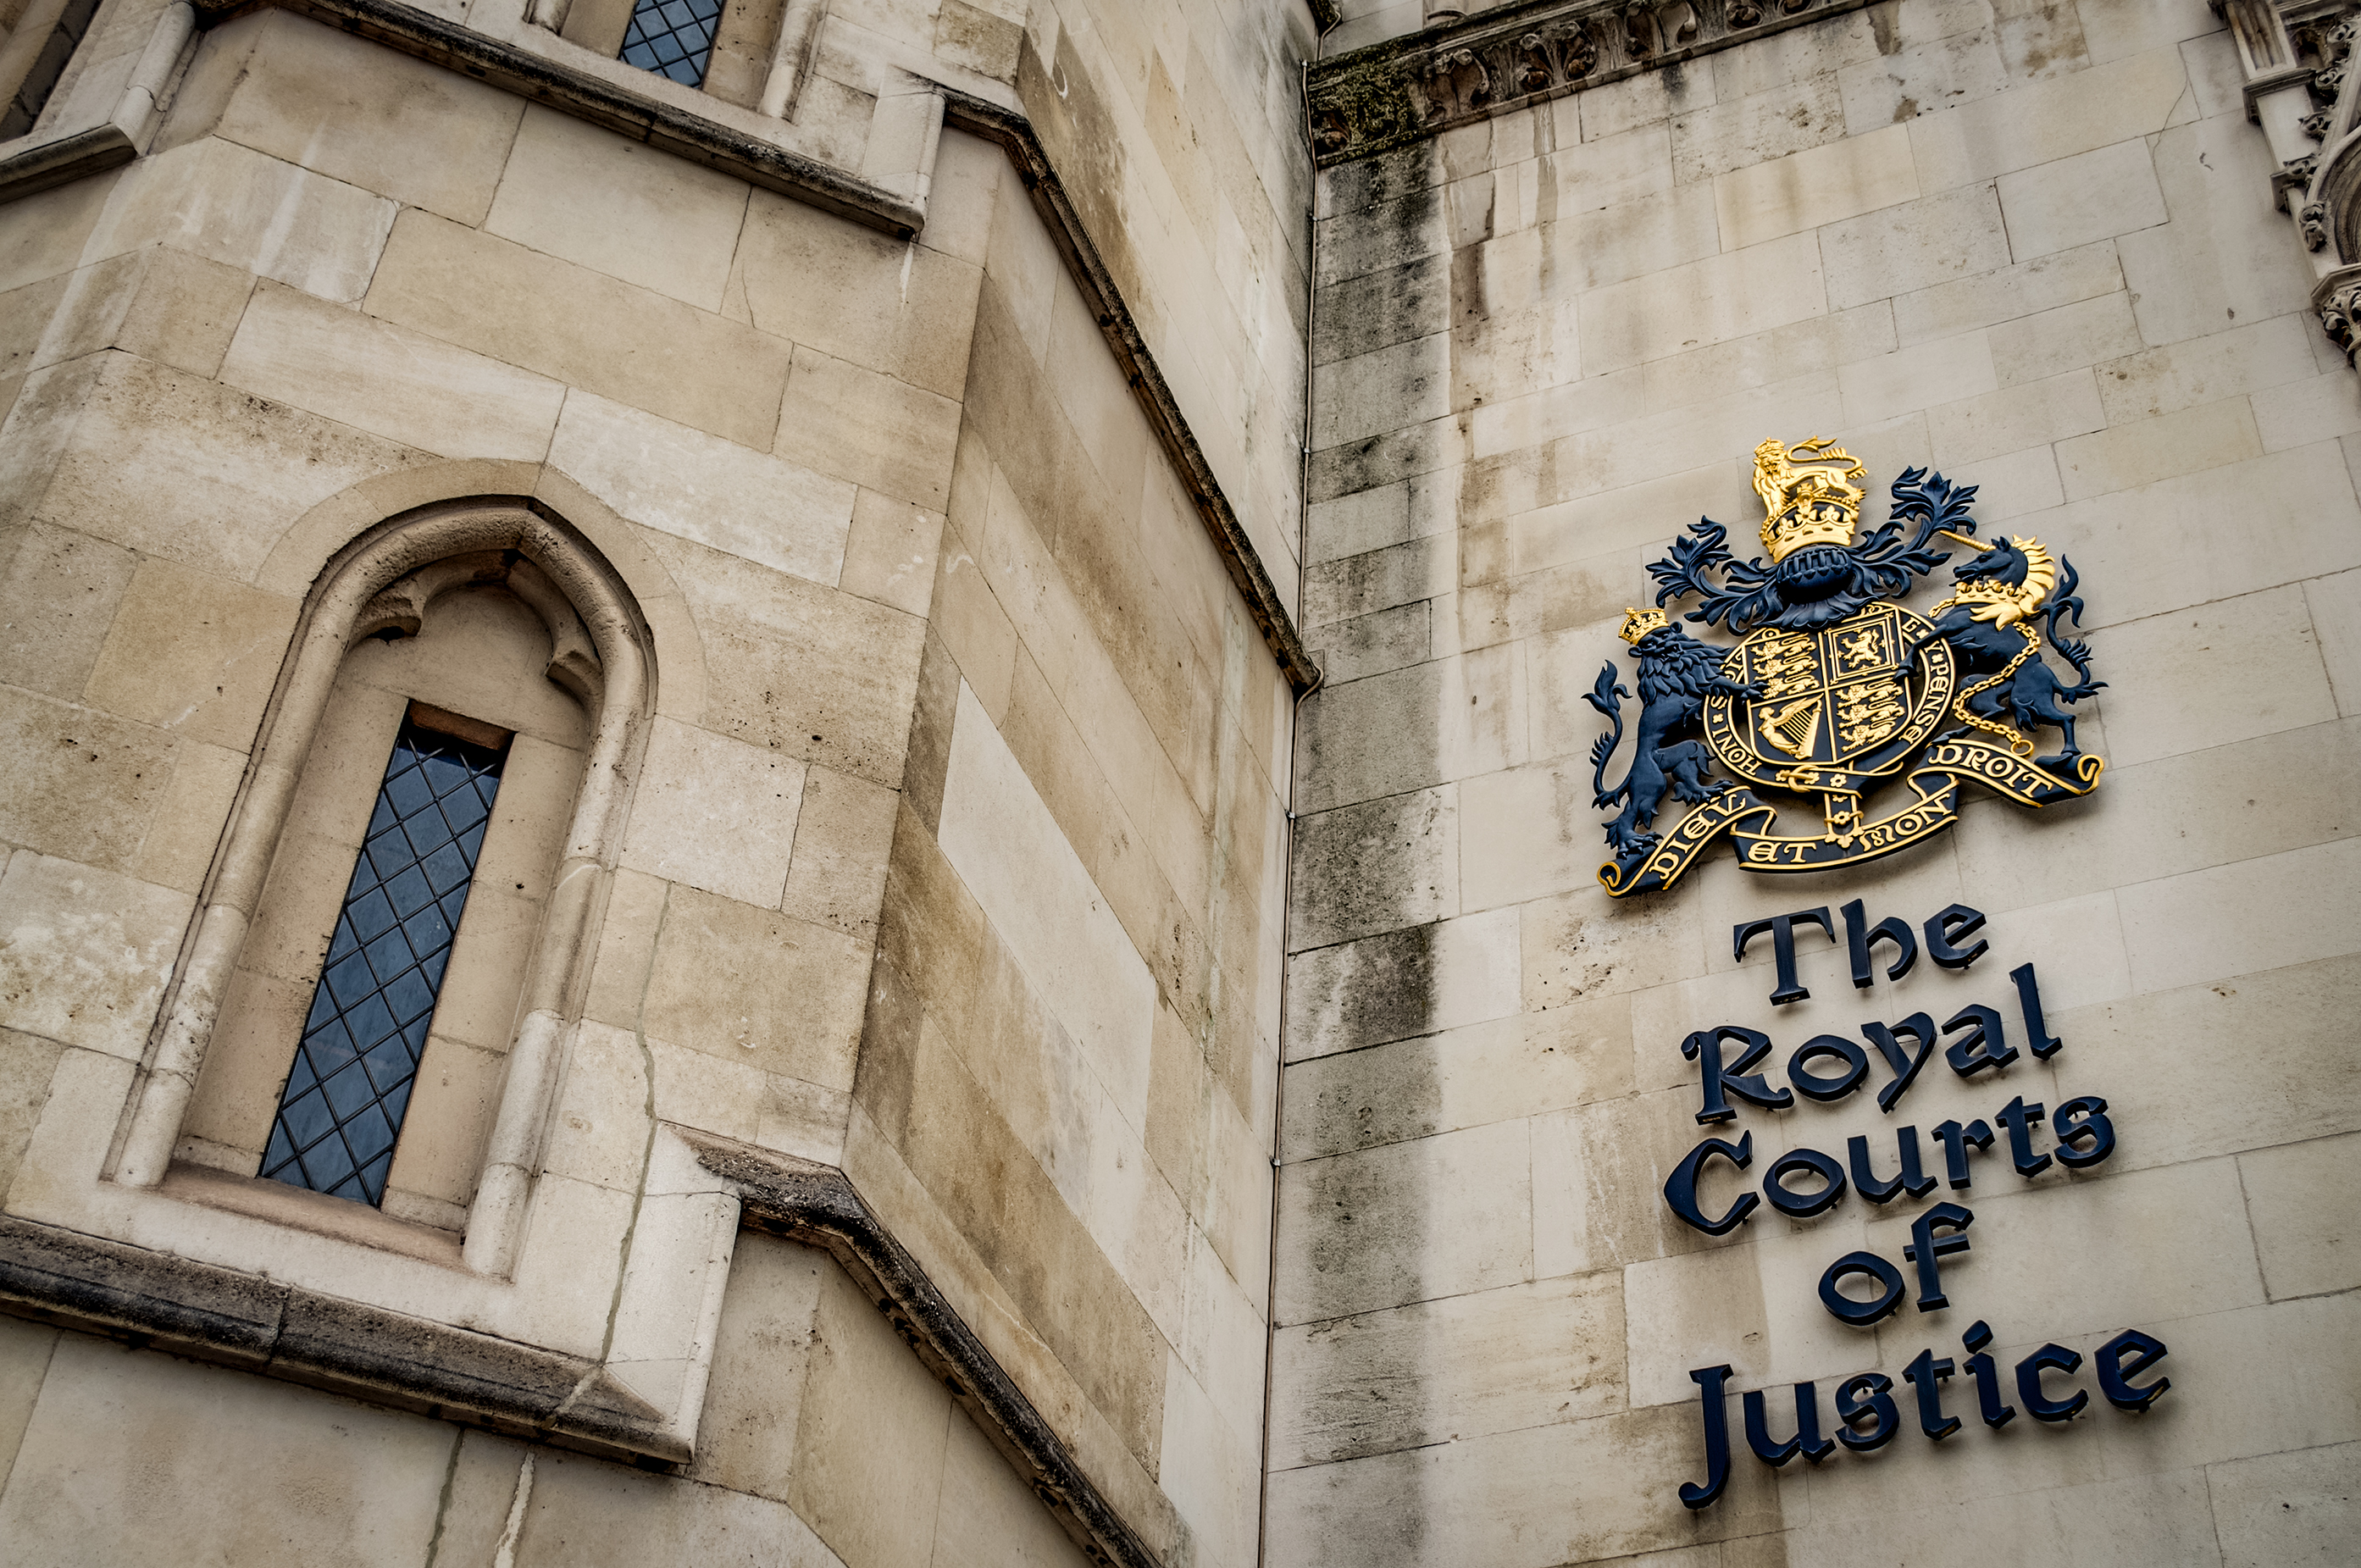 Council claims victory in high court planning battle